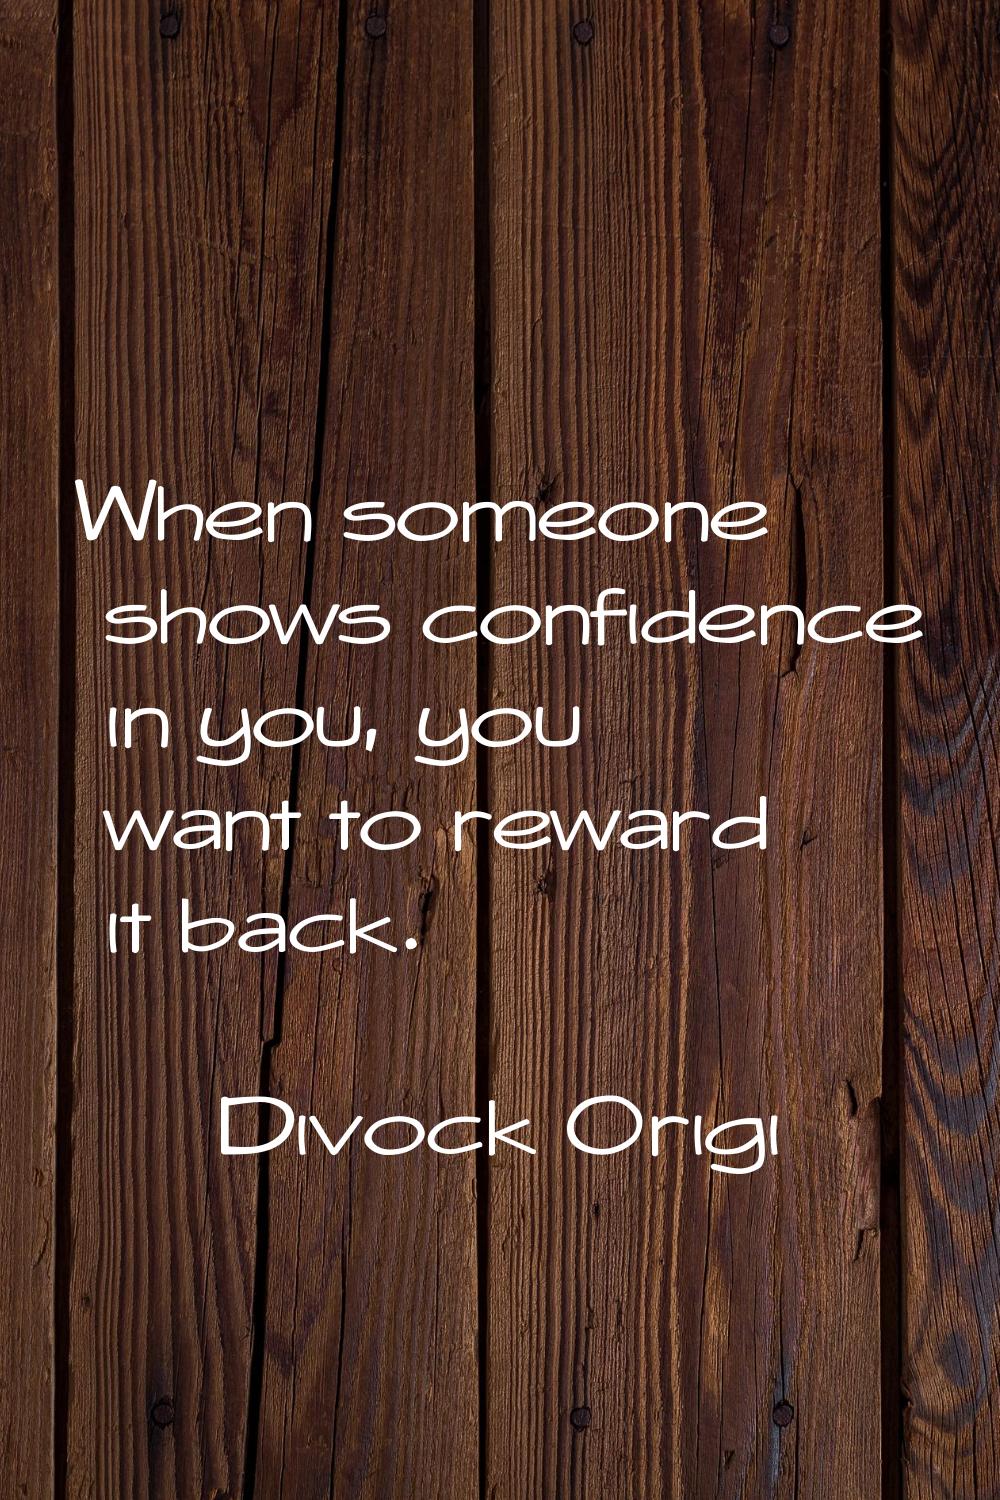 When someone shows confidence in you, you want to reward it back.